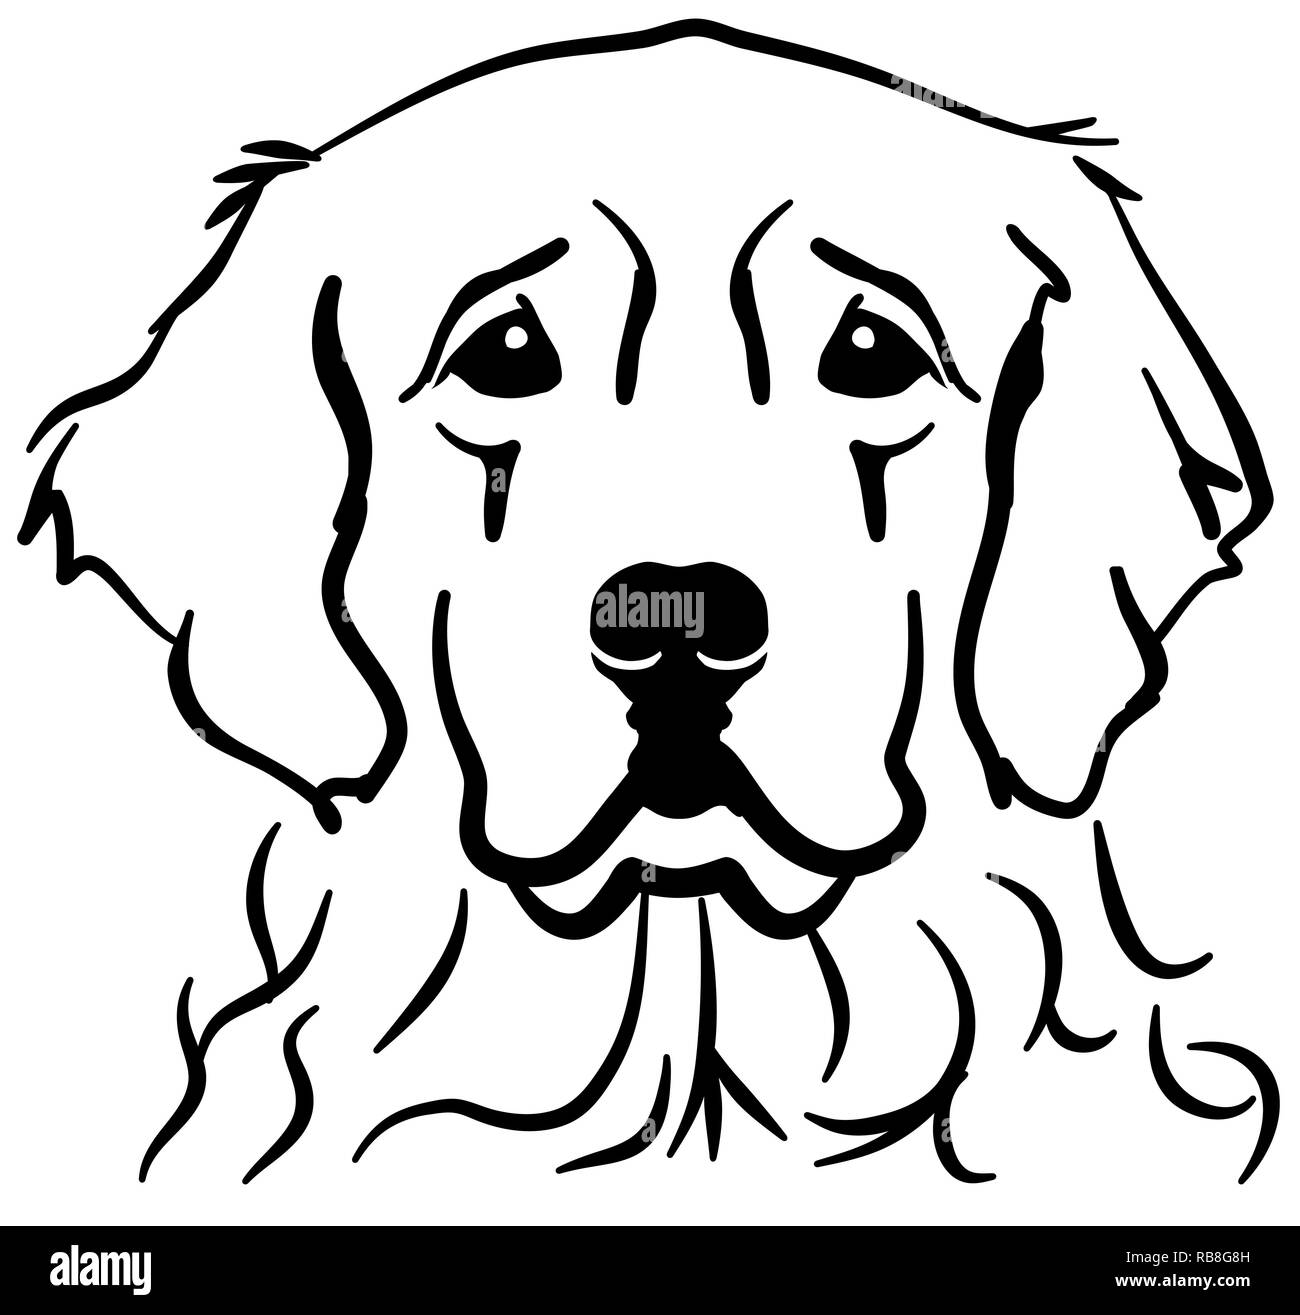 Golden Retriever Dog Head Silhouette Look at pictures of